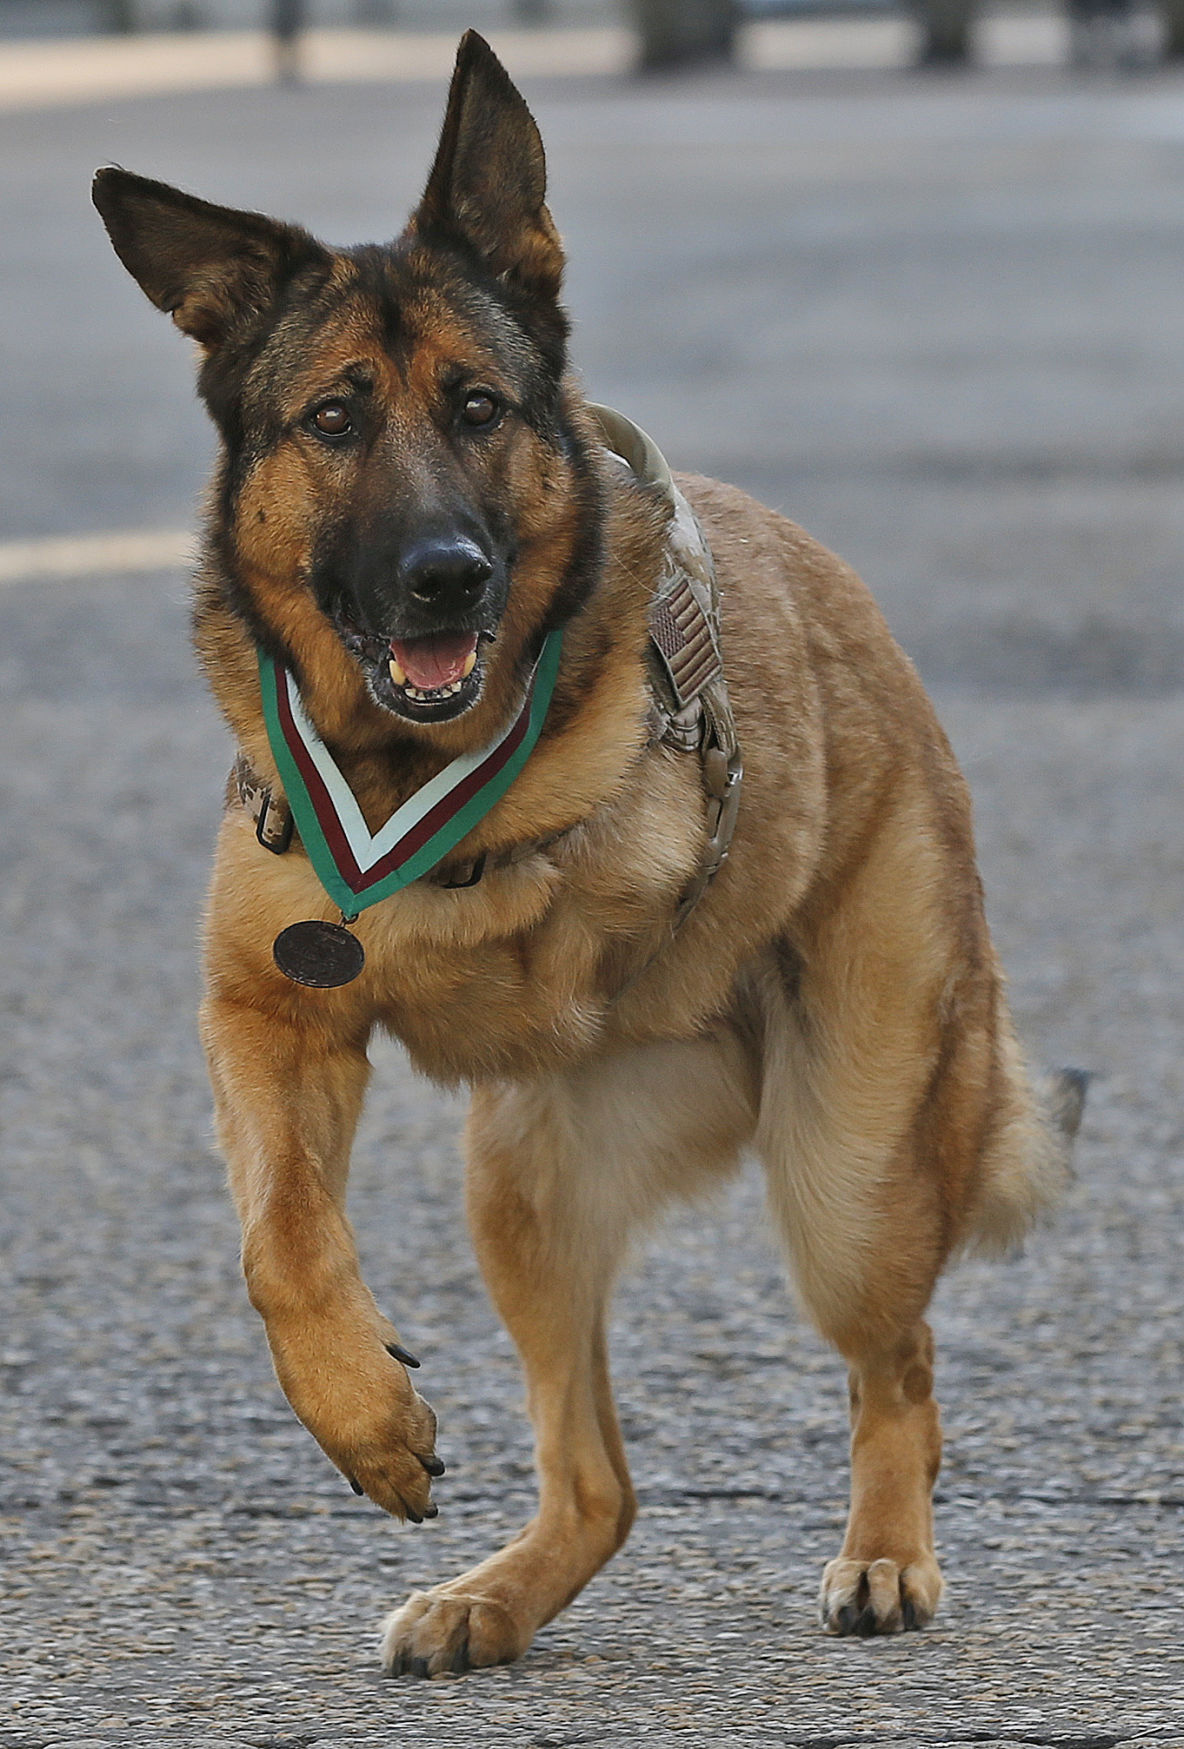 united states marines corps as a specialized search dog lucca